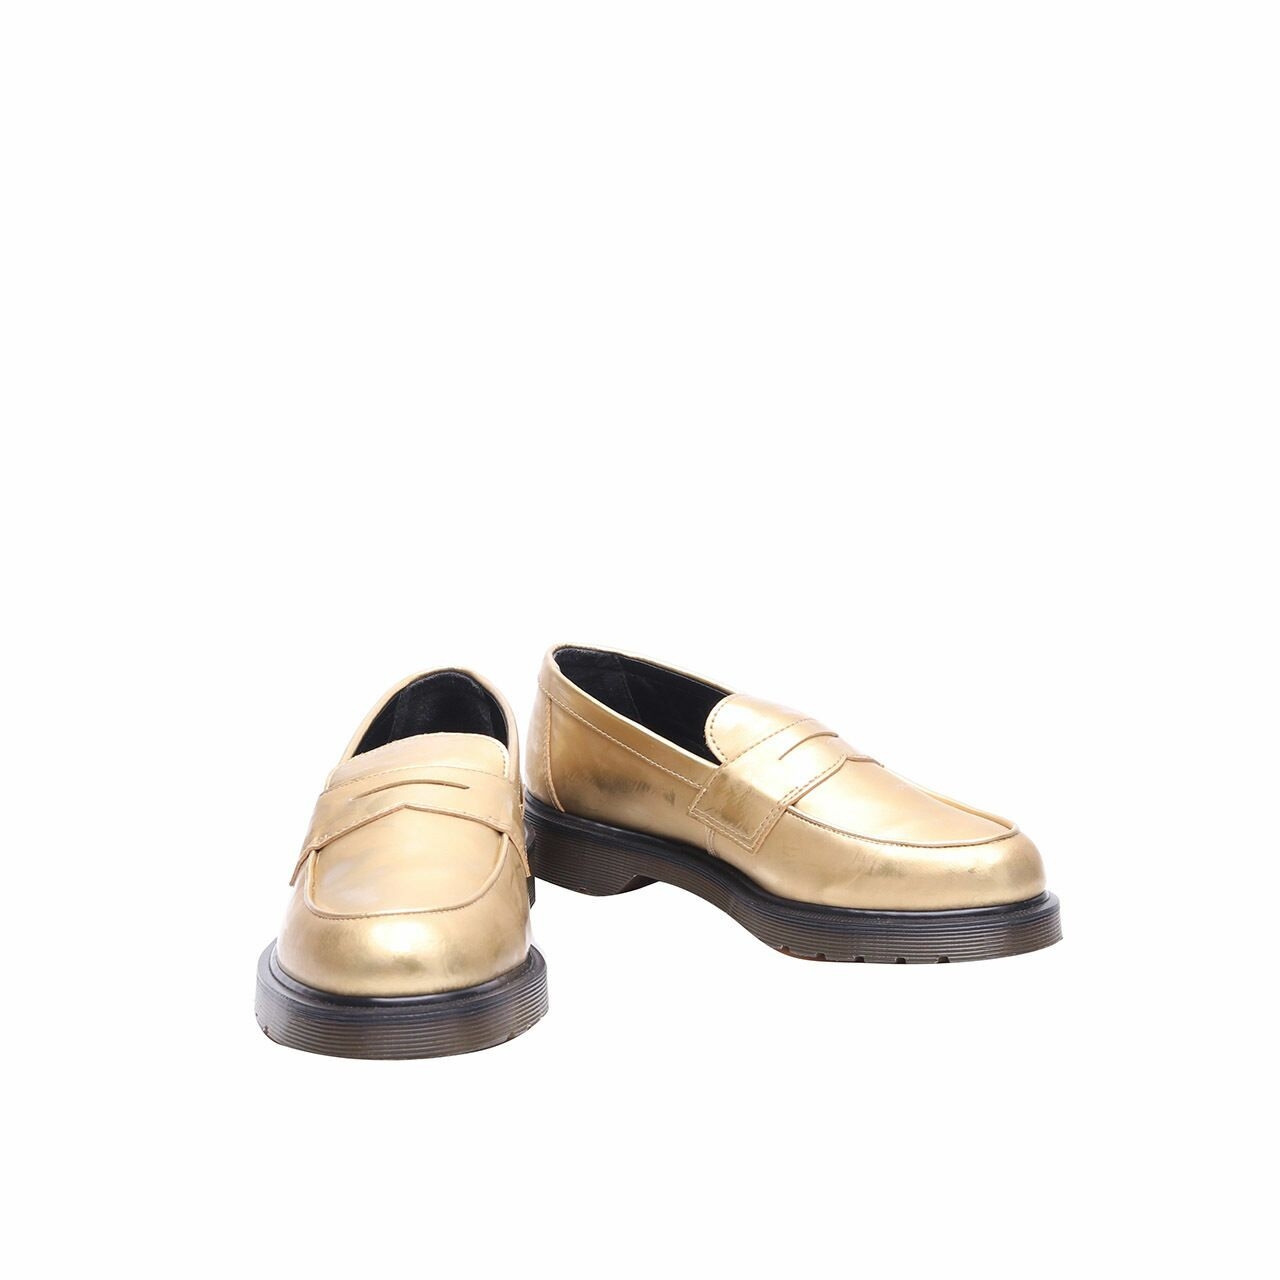 DRMARTENS Gold Loafers Flats